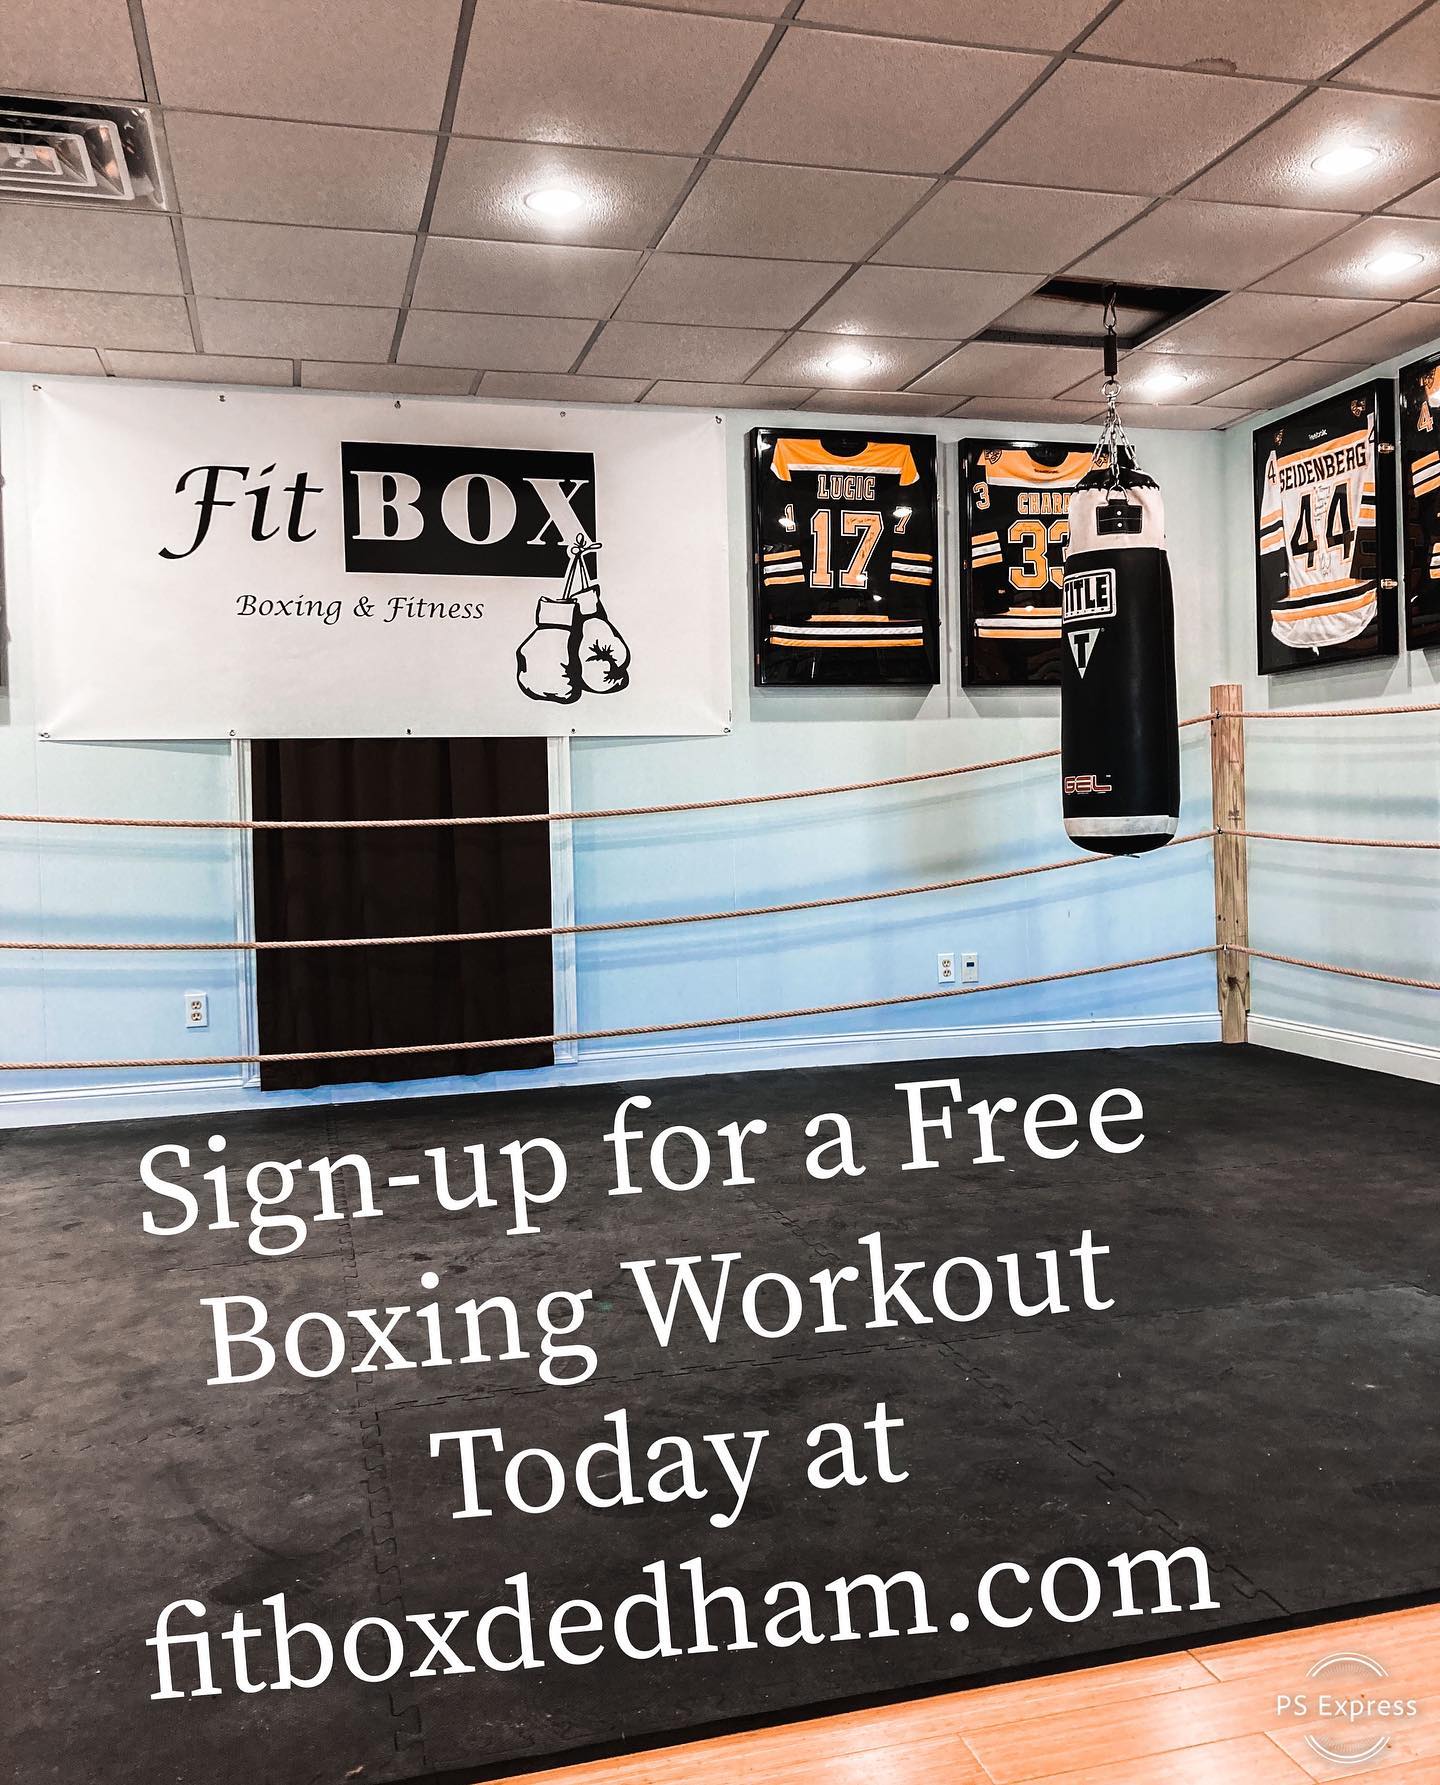 The Spring is almost here and it’s time to make some changes ... , it’s known as one of the top workouts on the market for men and women of all ages. Contact us today to try a free boxing workout and to learn more about FitBOX. Call/text (781)727-9503 or email fitbox@outlook.com .
.